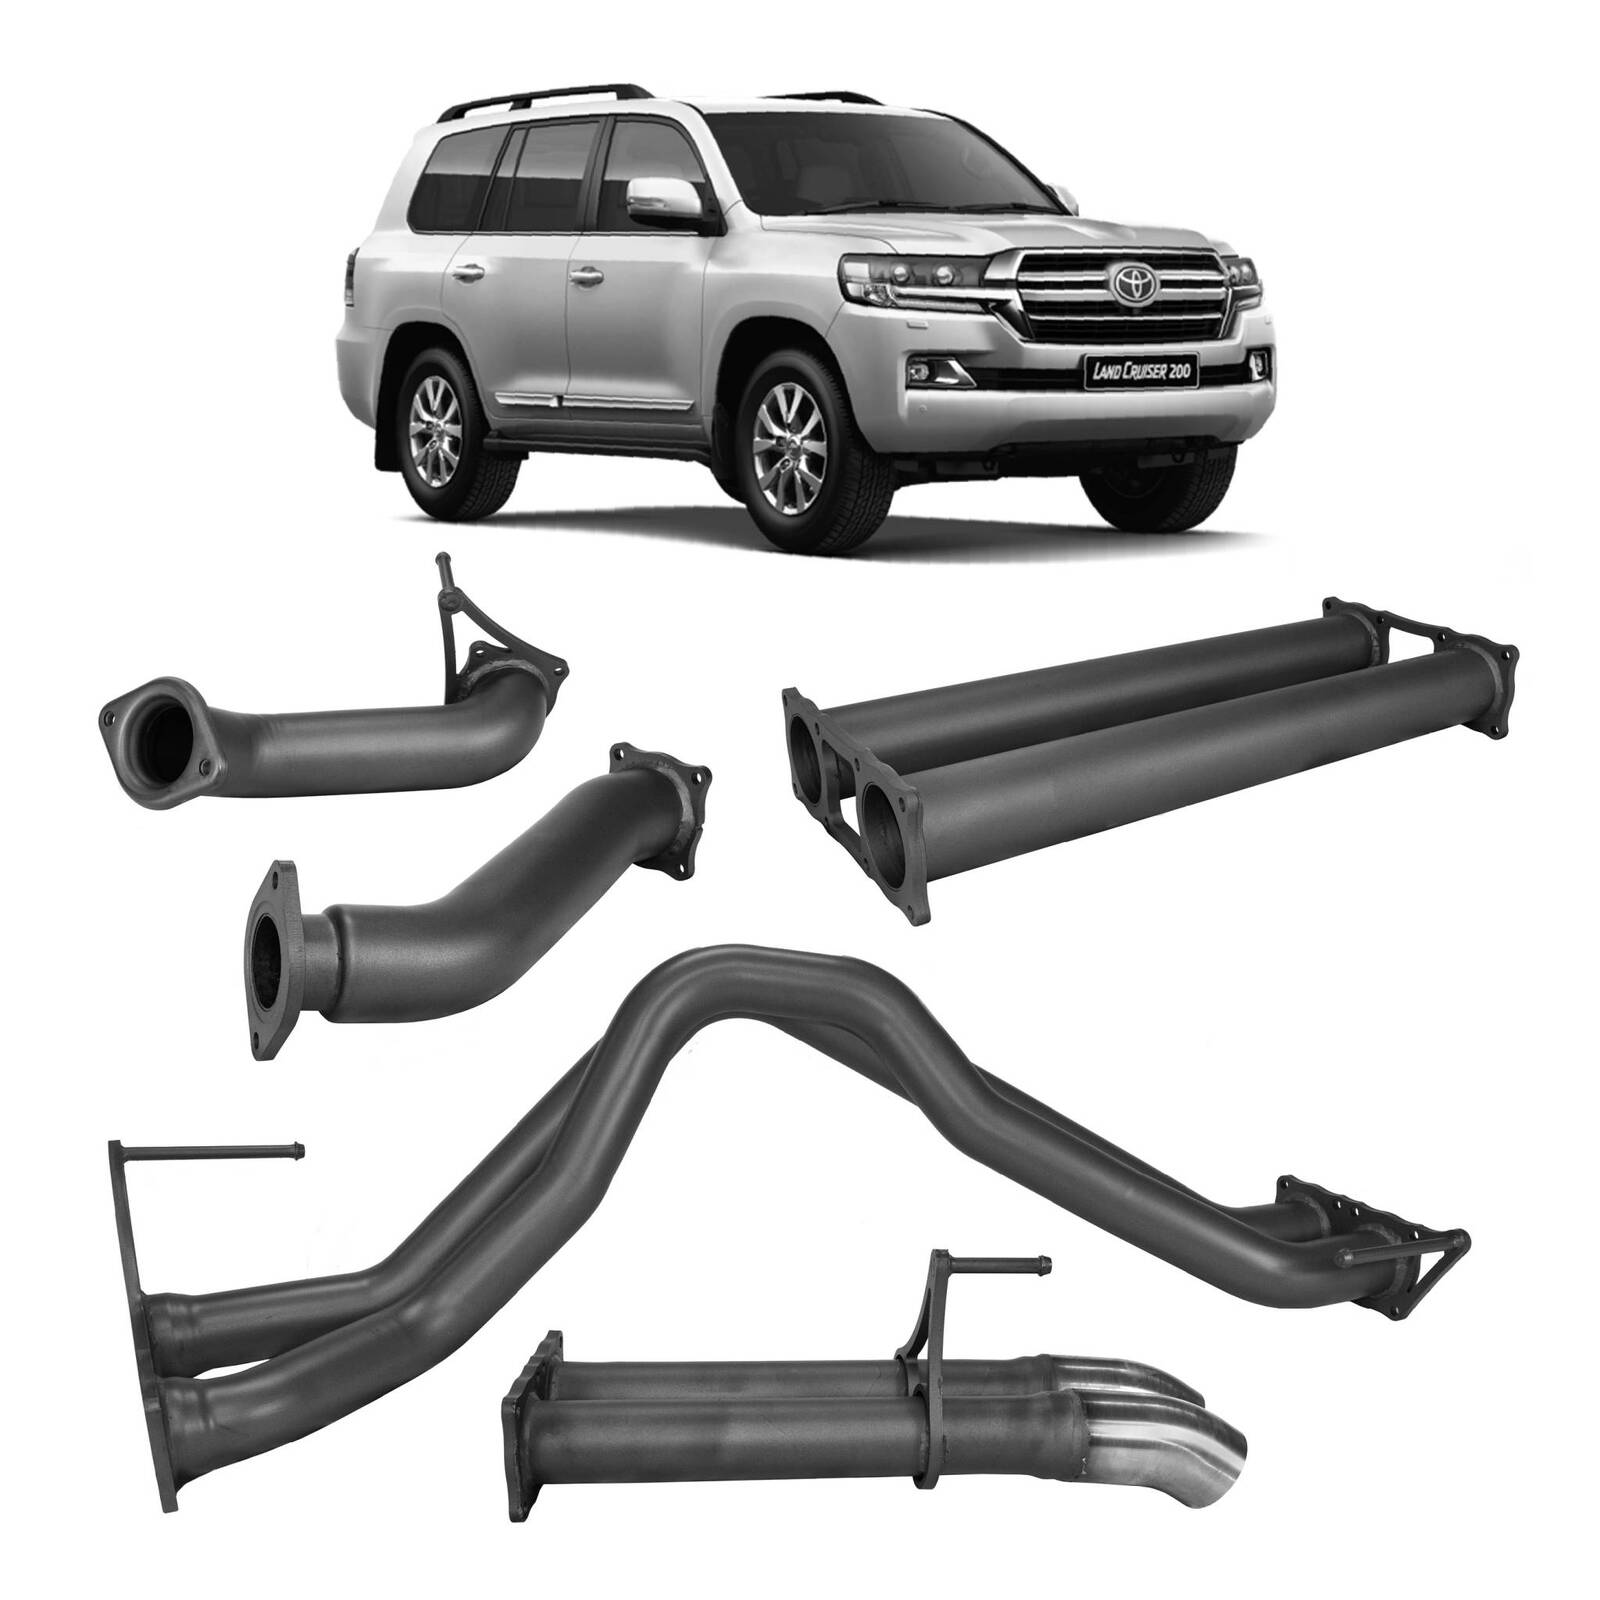 Redback 4x4 Extreme Duty Exhaust to suit Toyota Landcruiser 200 Series 4.5L V8 (10/2015 on)